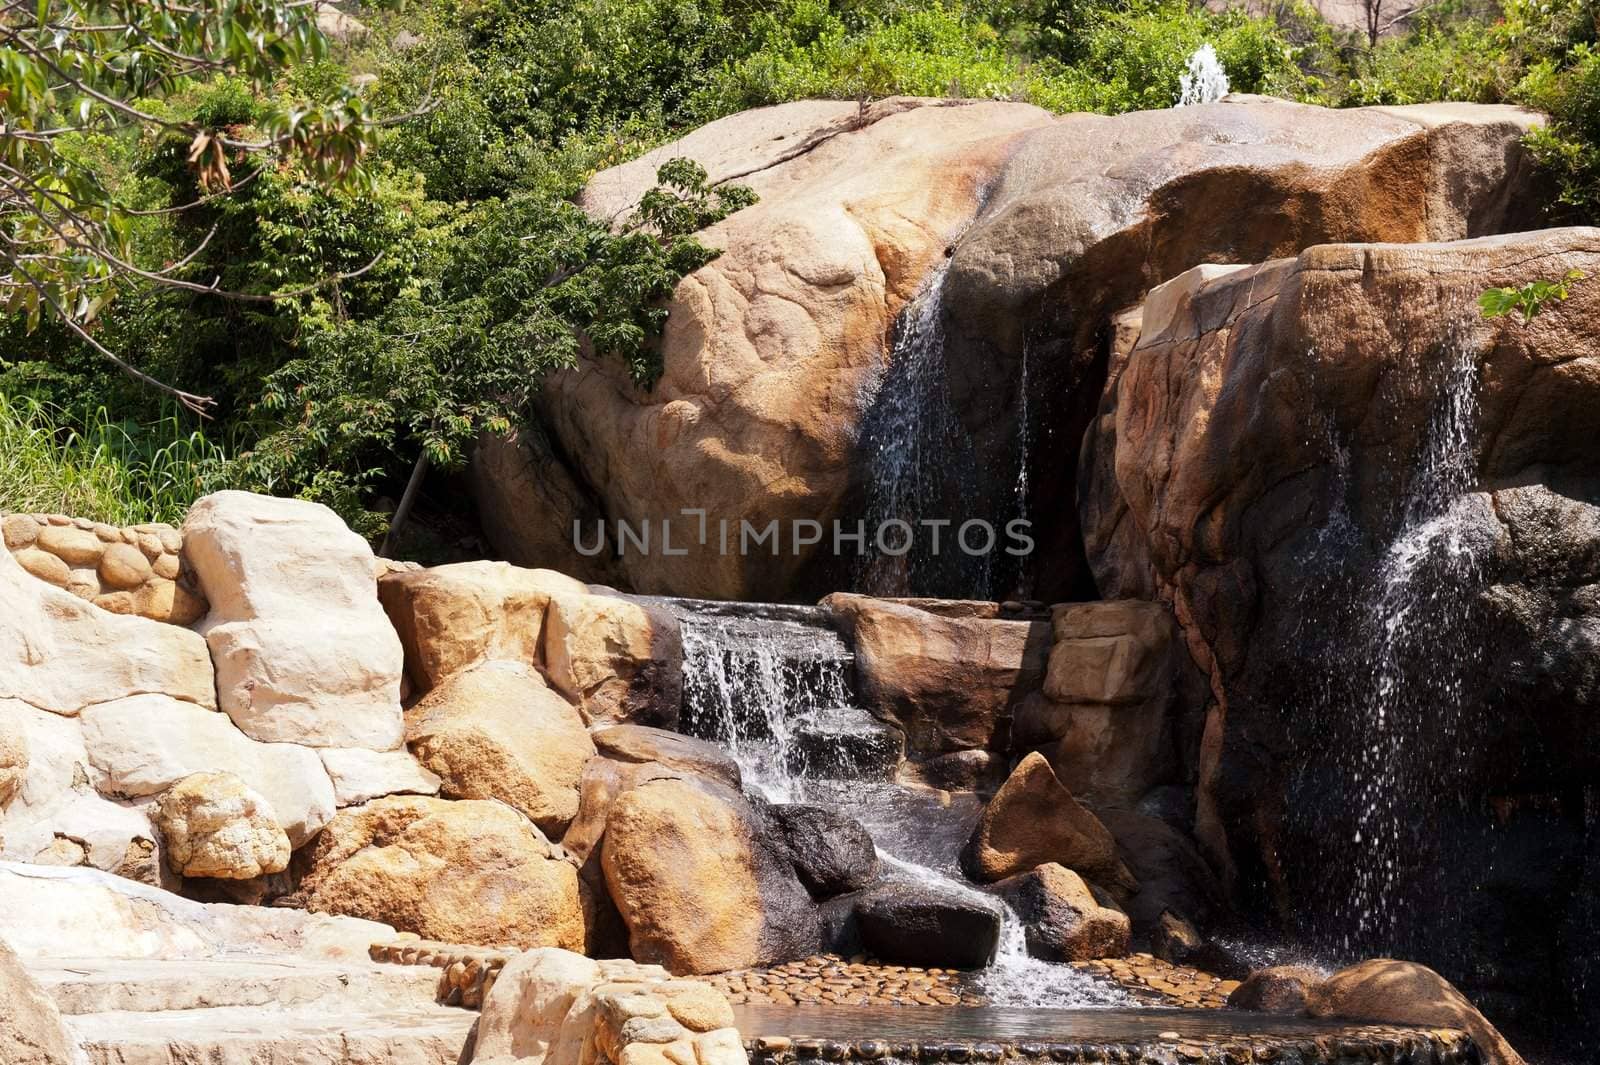 Waterfall in the garden with stones and trees